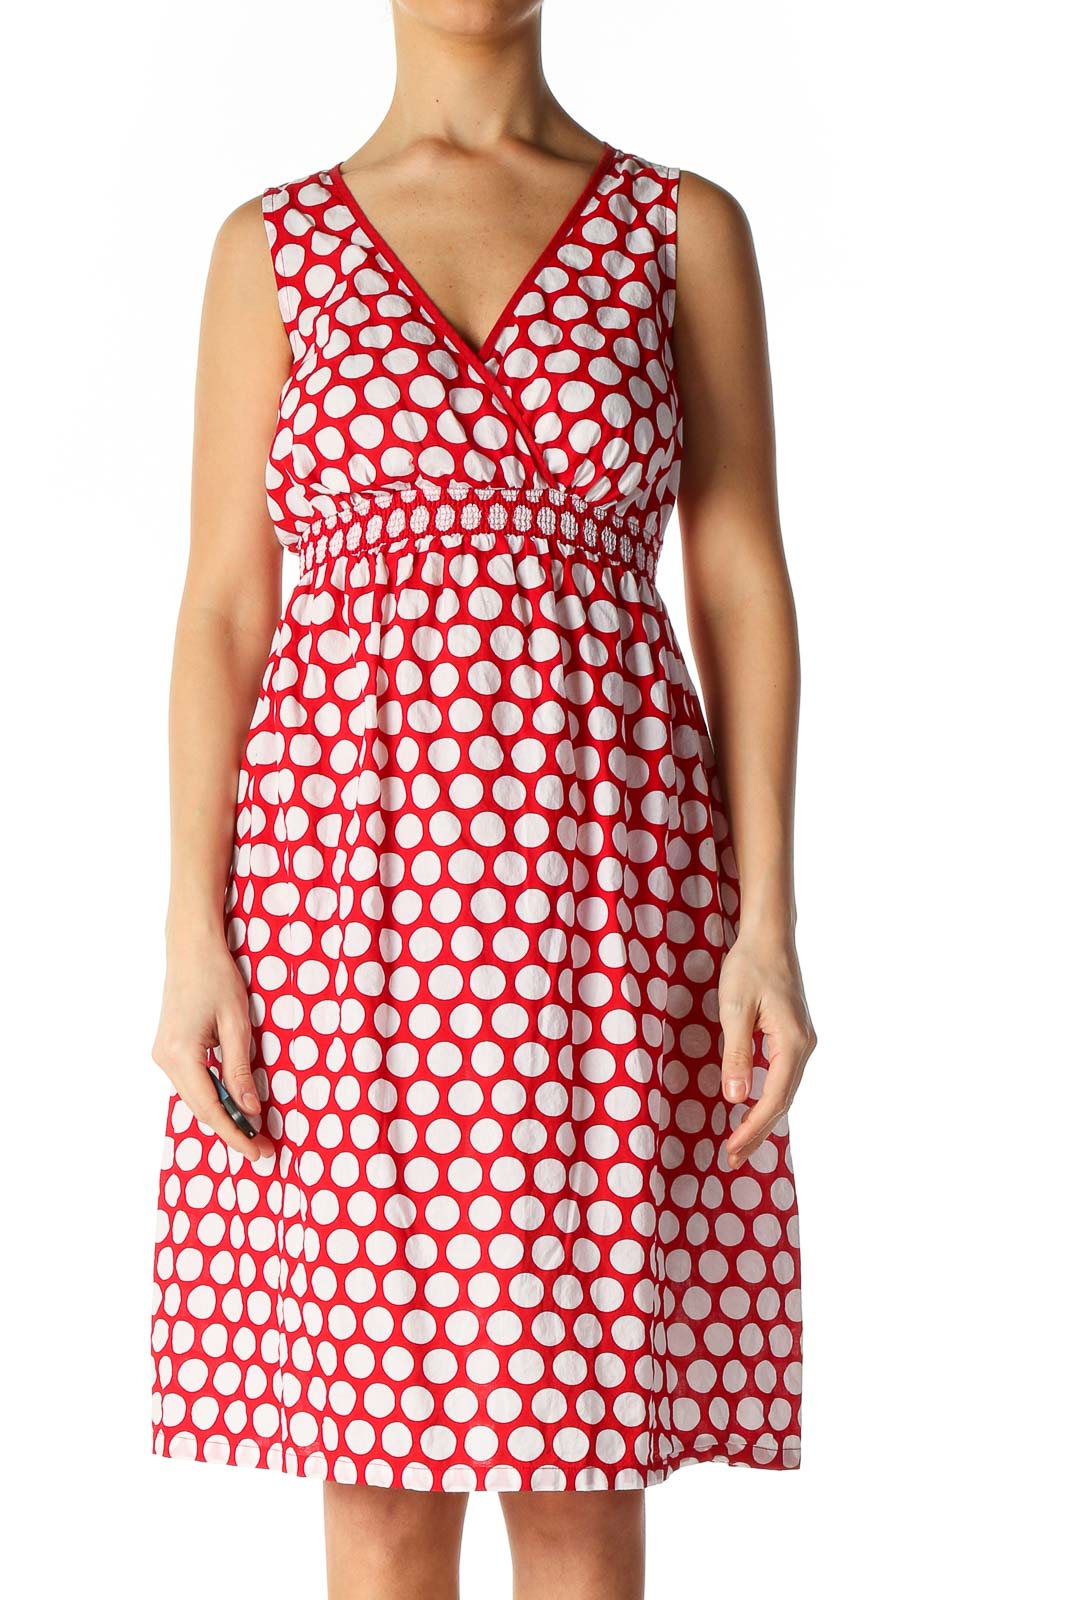 Red Polka Dot Casual A-Line Dress Front